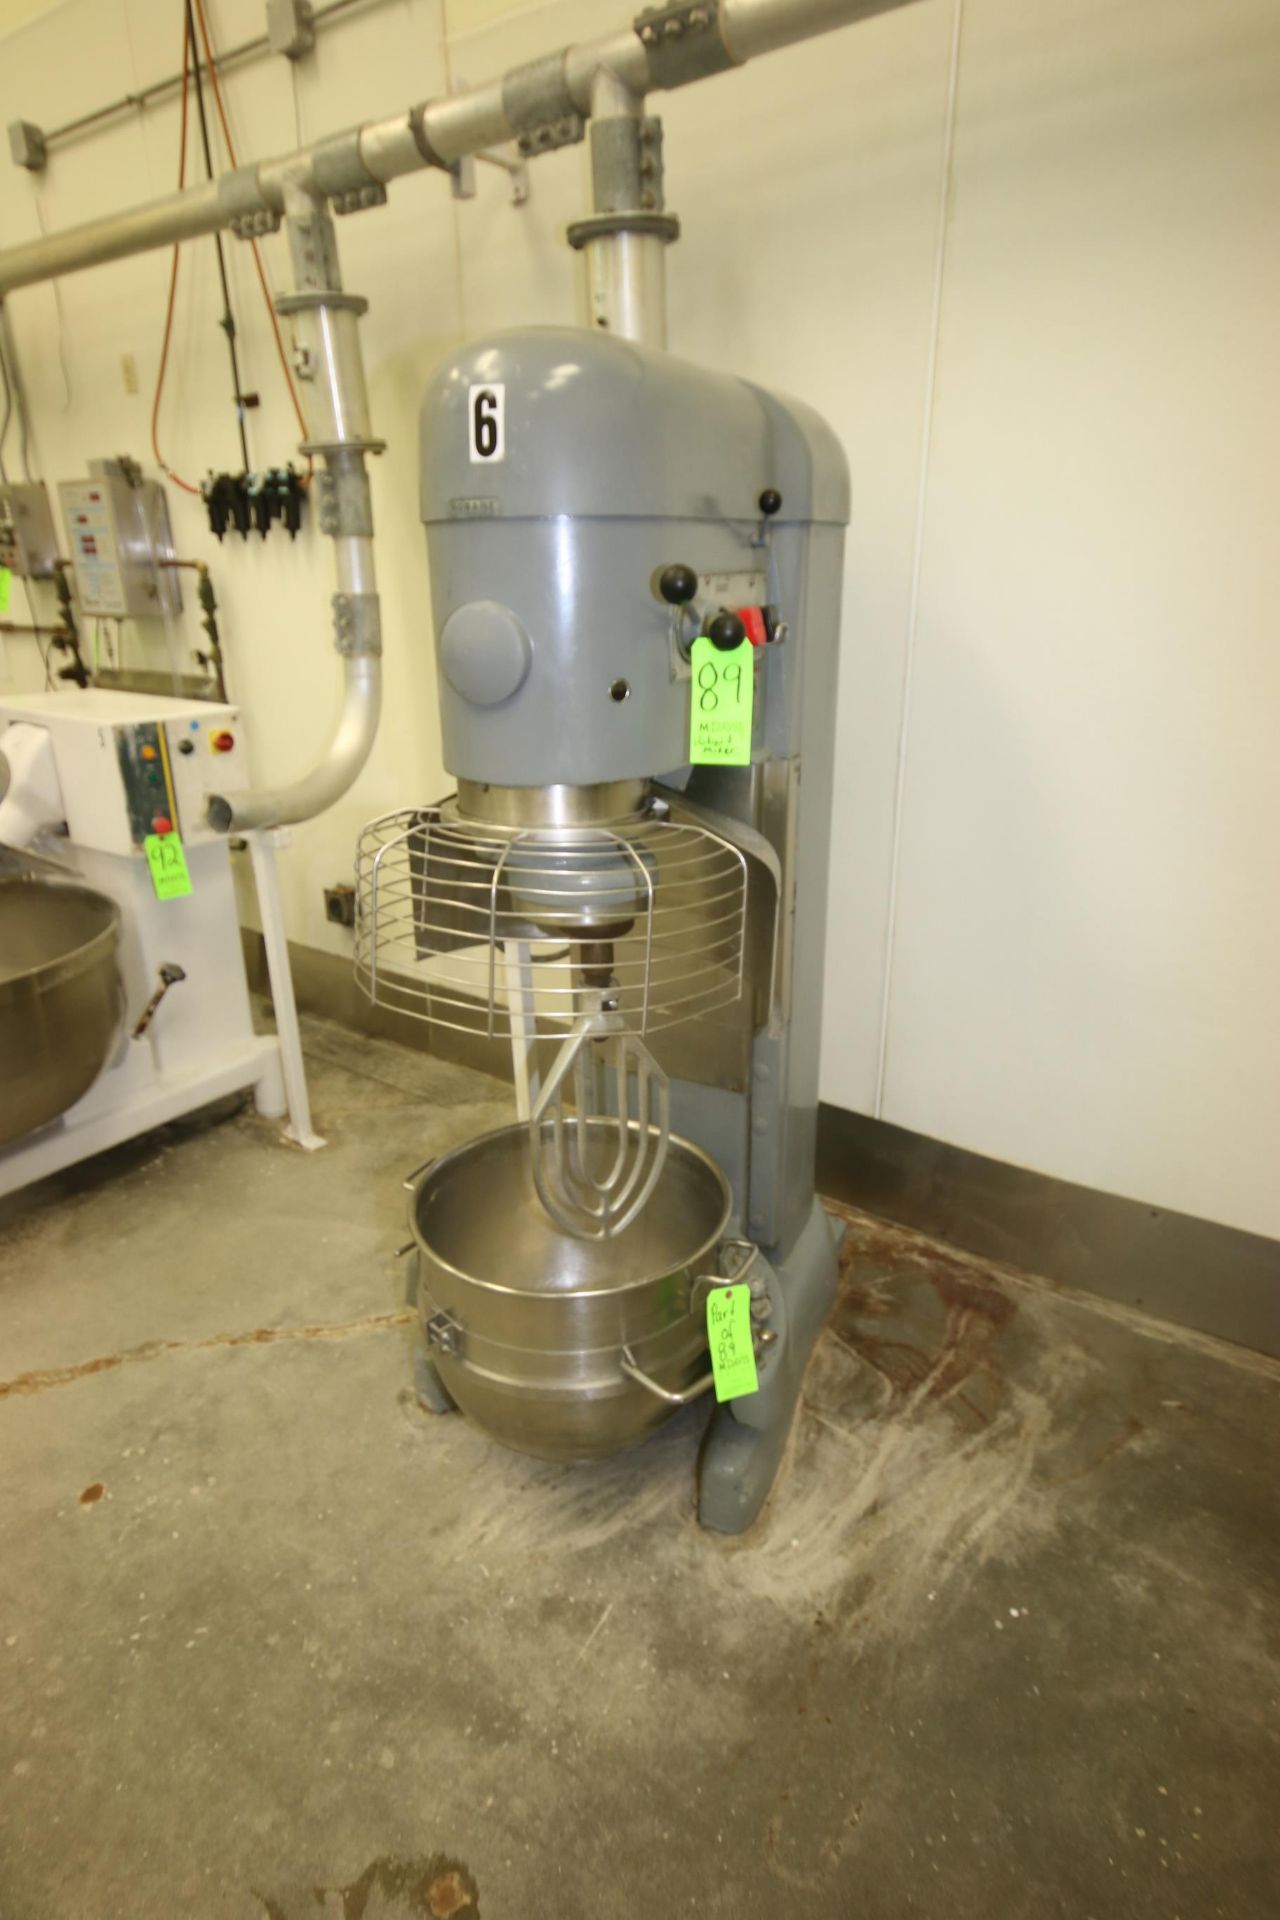 Hobart Mixer, M/N V1401, S/N 31-1220-328, 230 Volts, 3 Phase, with S/S Mixing Bowl, with S/S